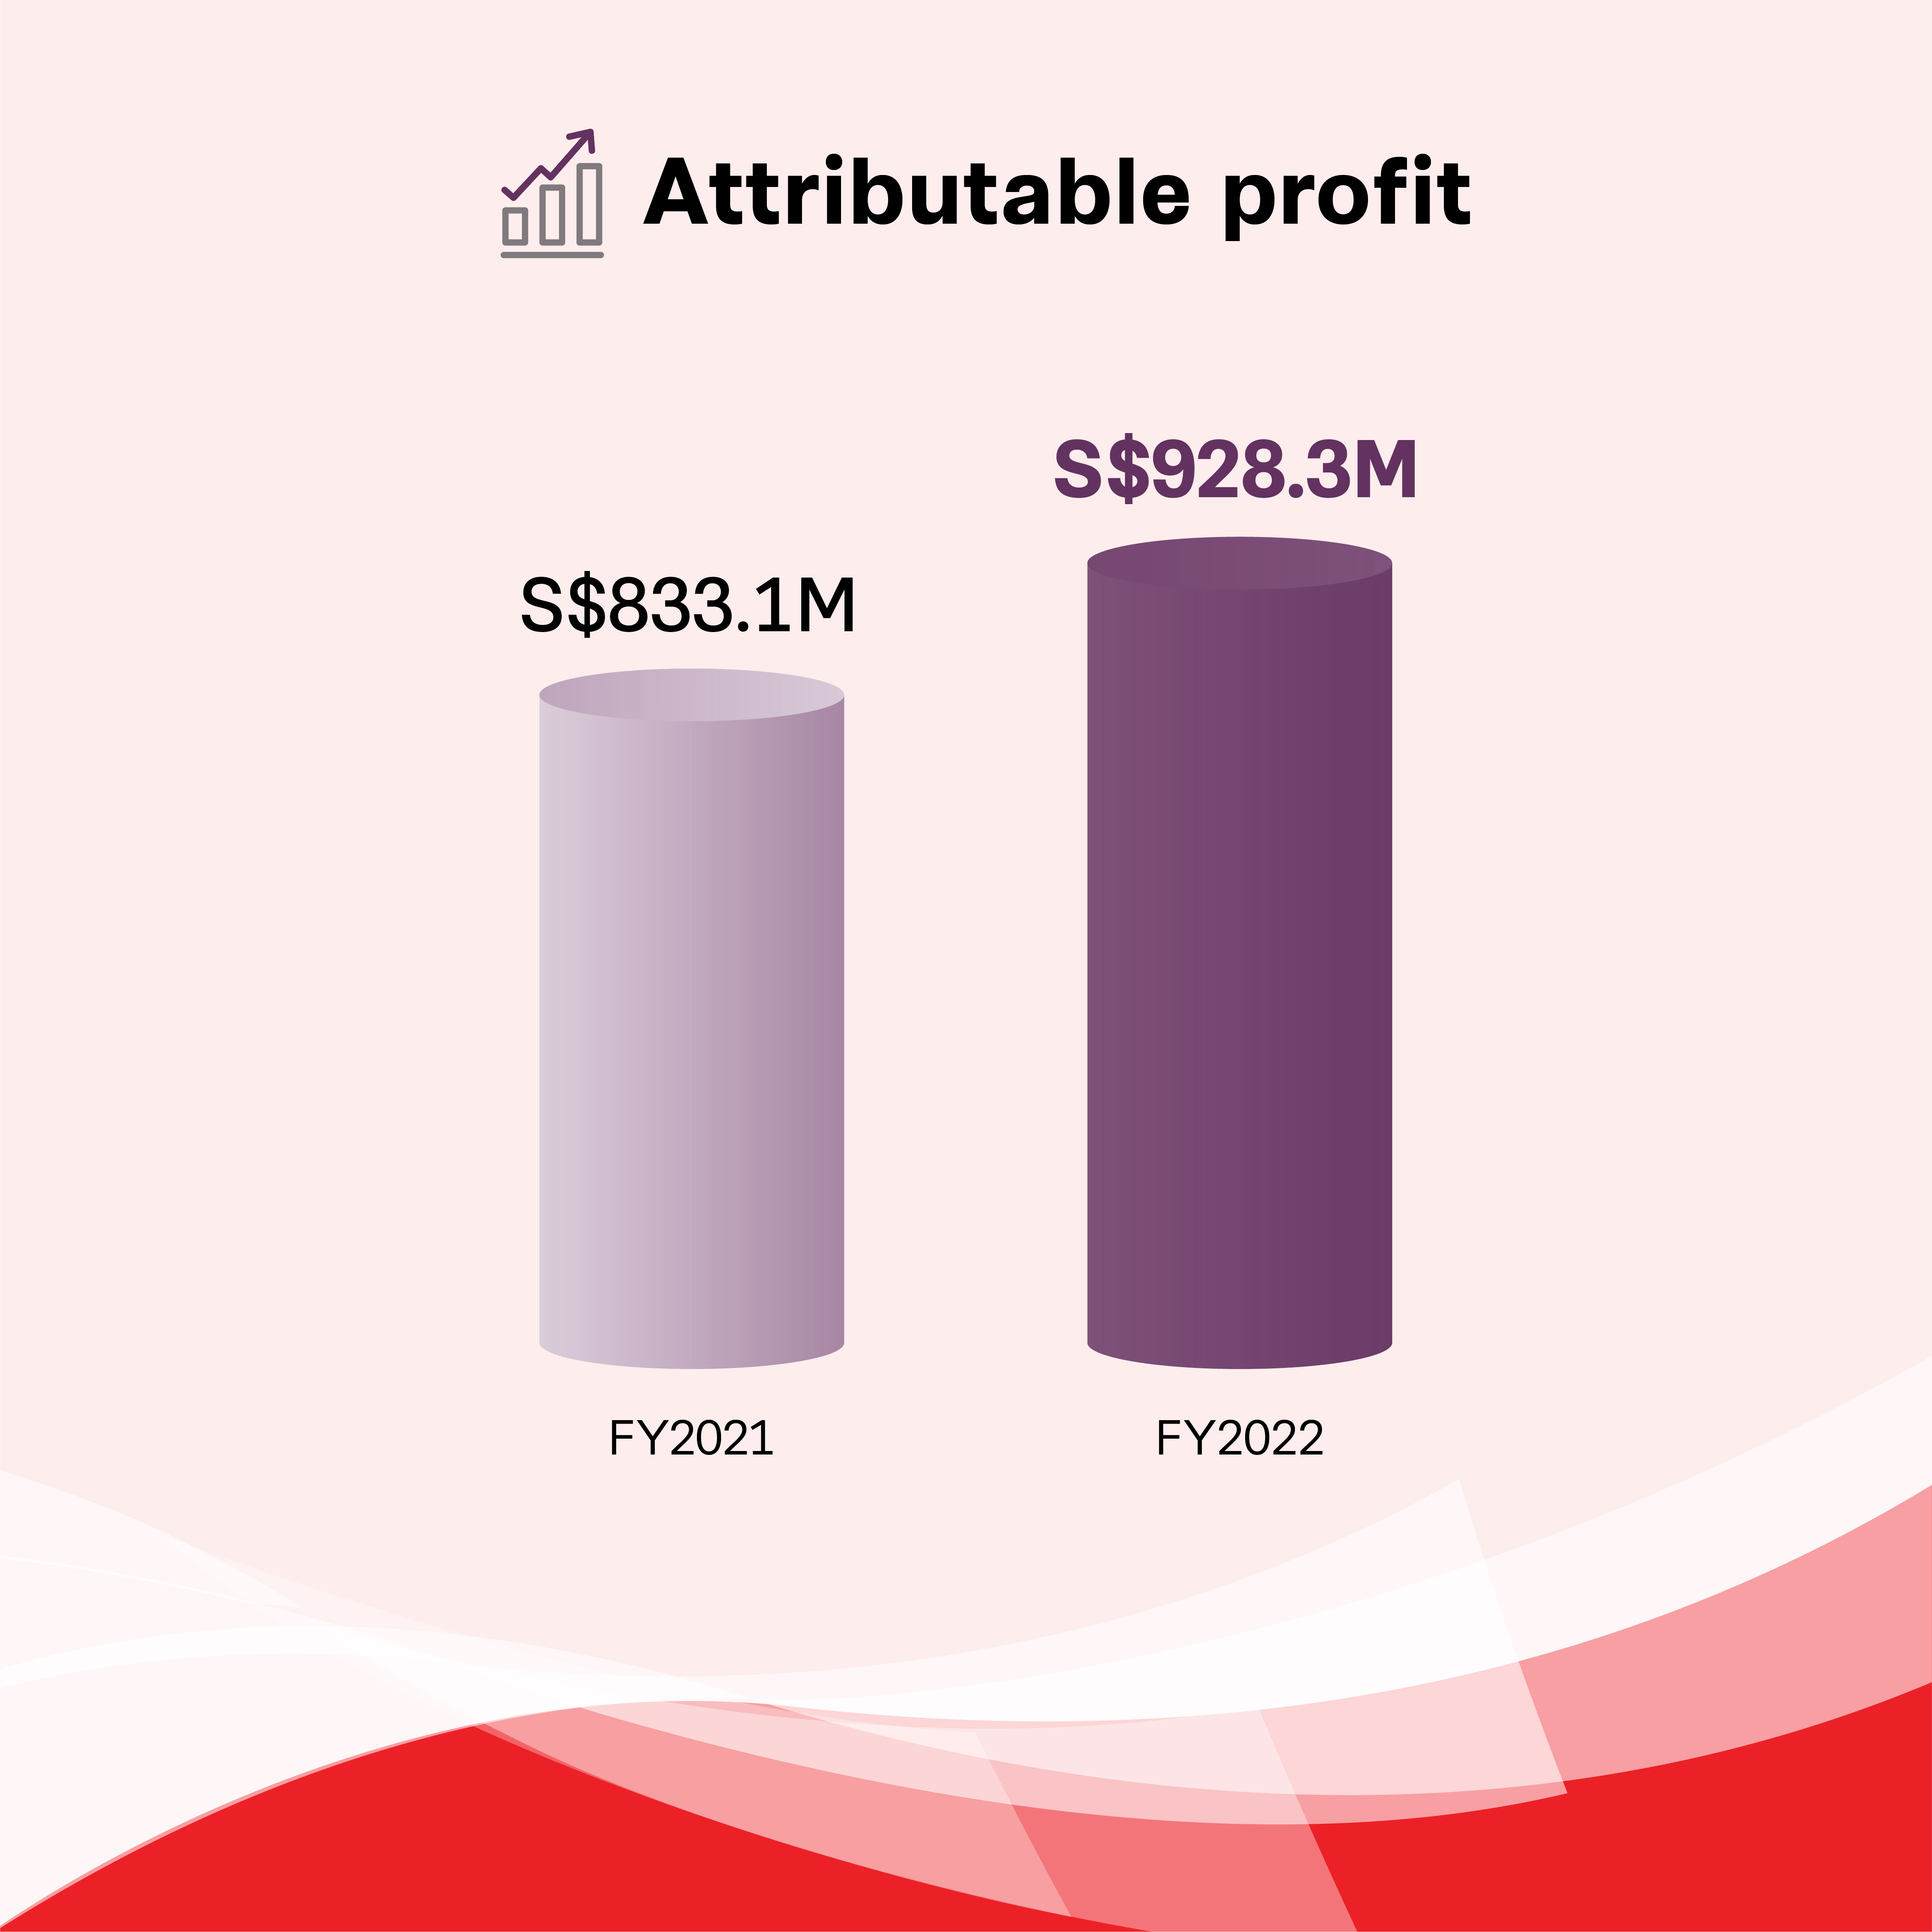 In FY22, Frasers Property delivered S$928.3 million in attributable profit, up 11.4% year-on-year. Key drivers of earnings in FY2022 include higher contributions from the Group’s Singapore and Australia residential businesses.